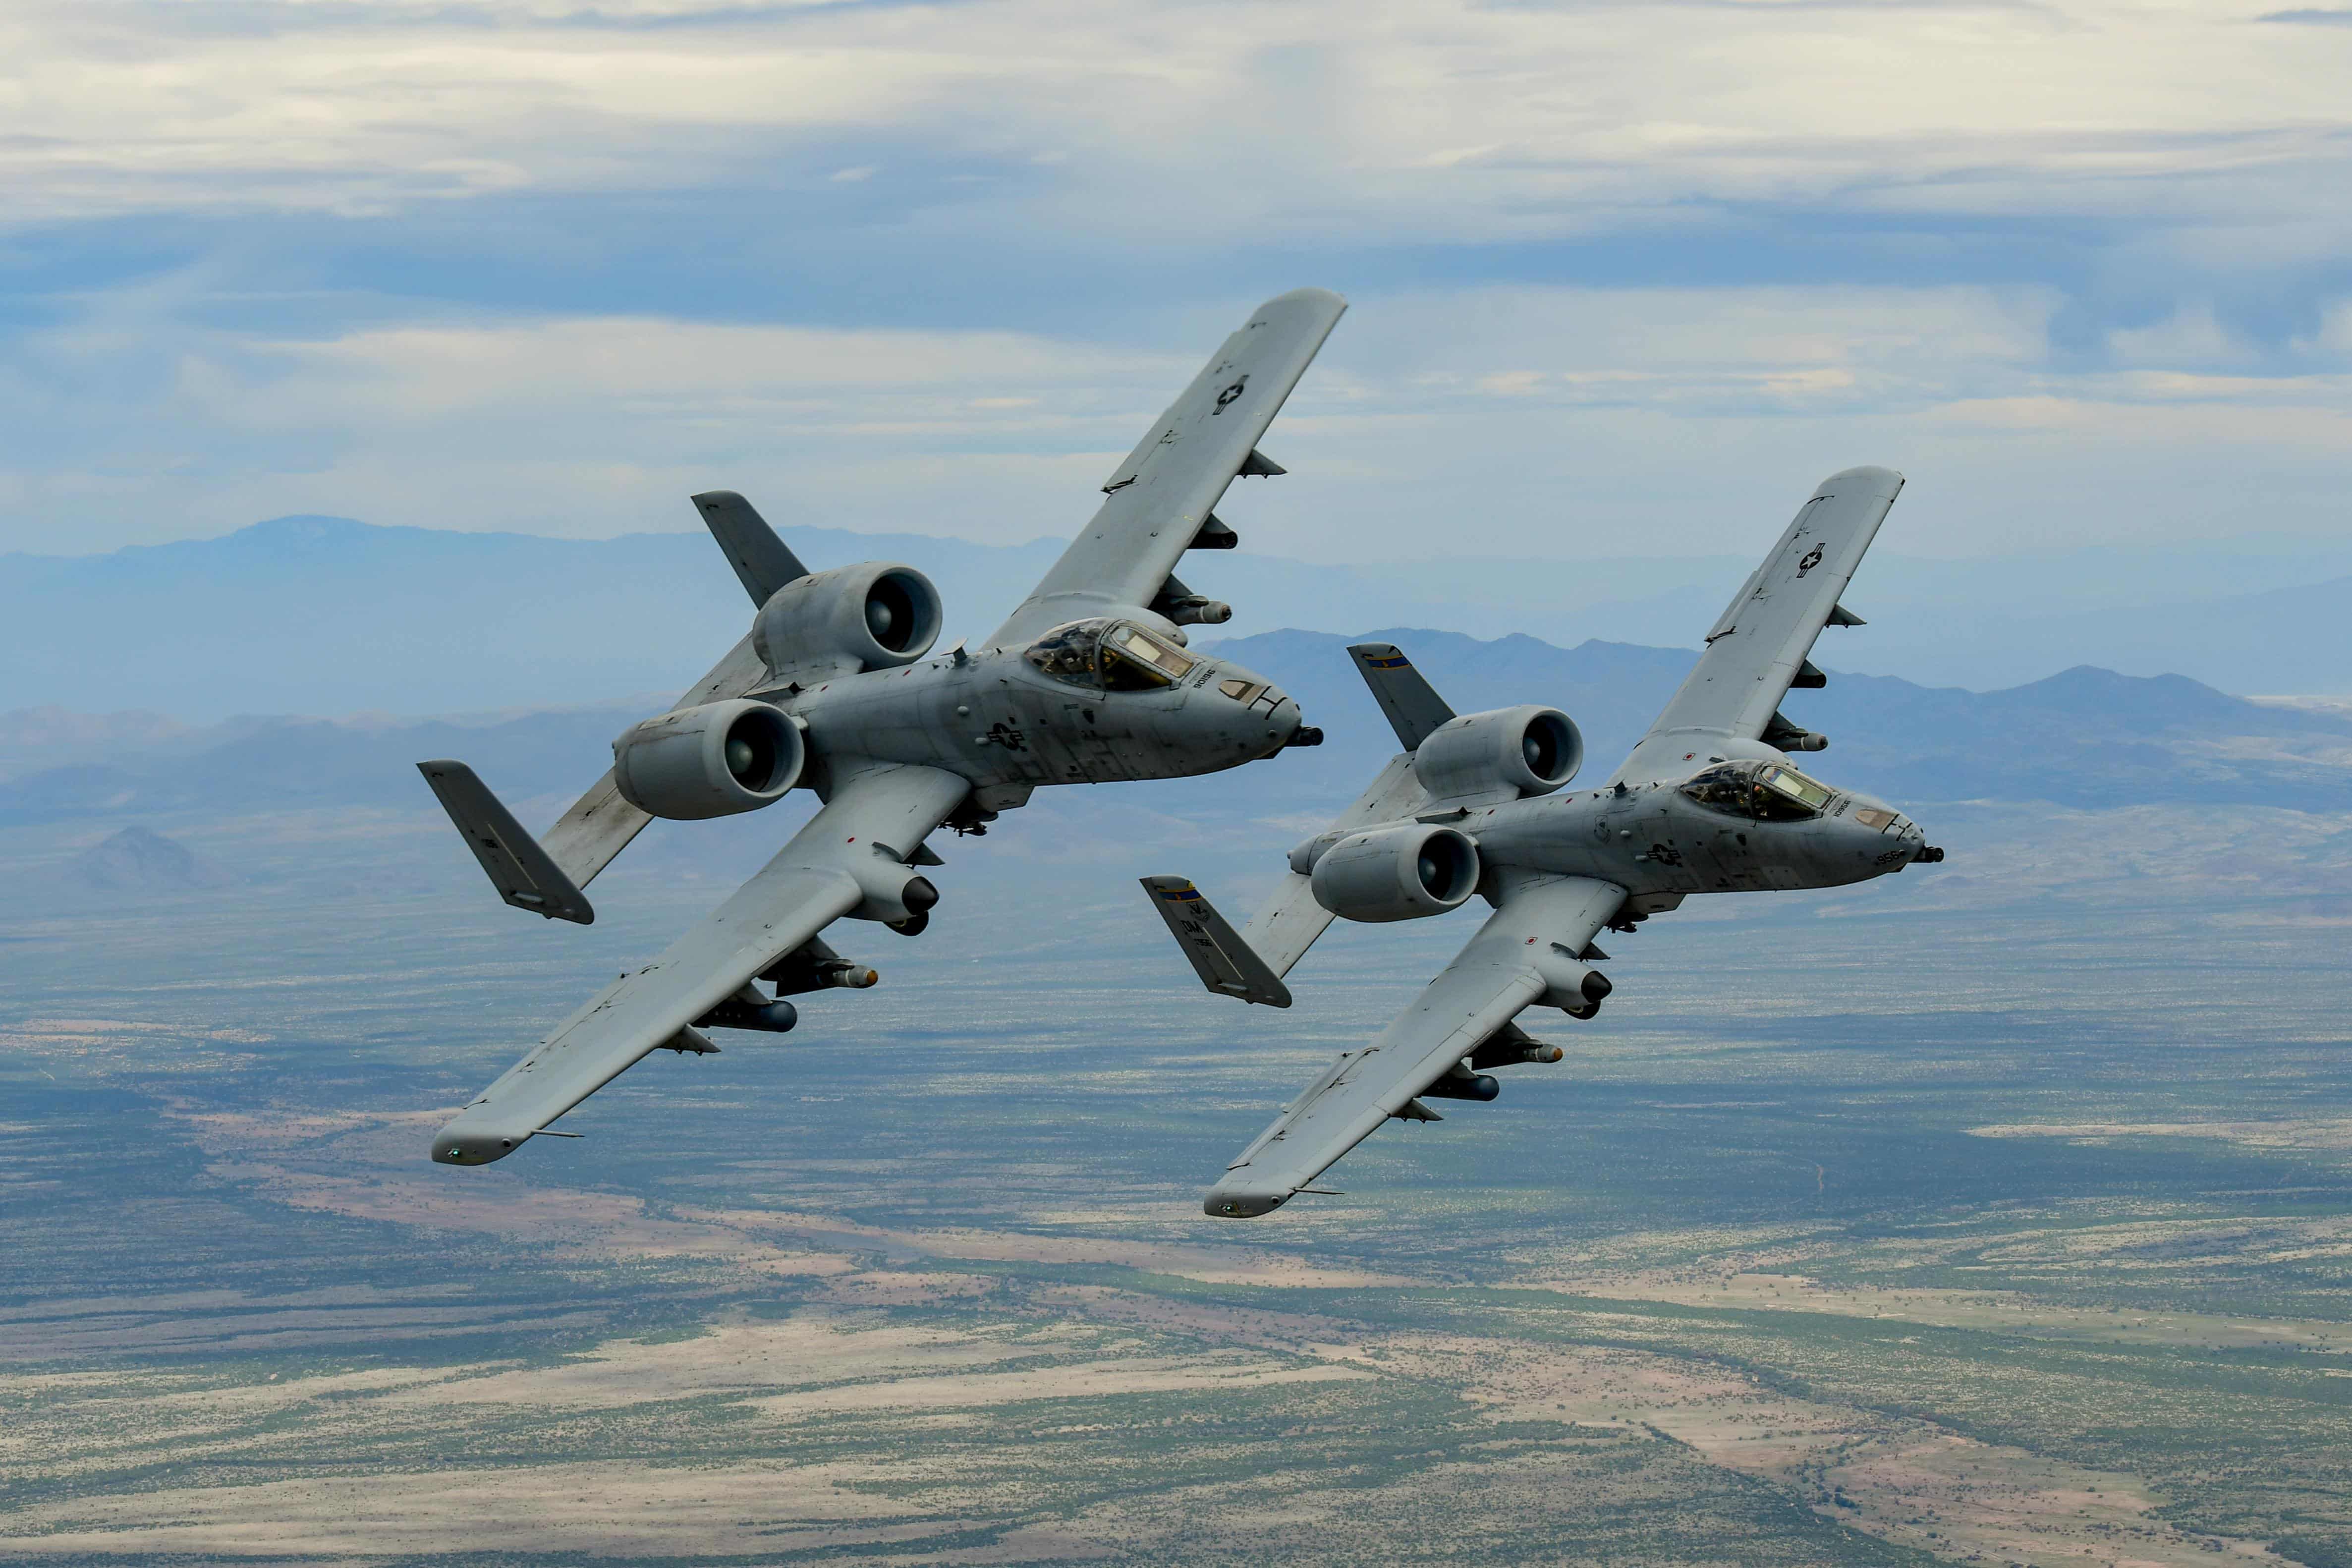 Two A-10 Thunderbolt IIs fly in formation over southern Arizona, April 29, 2019. The A-10s are assigned to the 355th Wing at Davis-Monthan Air Force, Arizona, which is home to a variety of combat-ready Airmen and assets. (U.S. Air Force photo by Staff Sgt. Betty R. Chevalier)